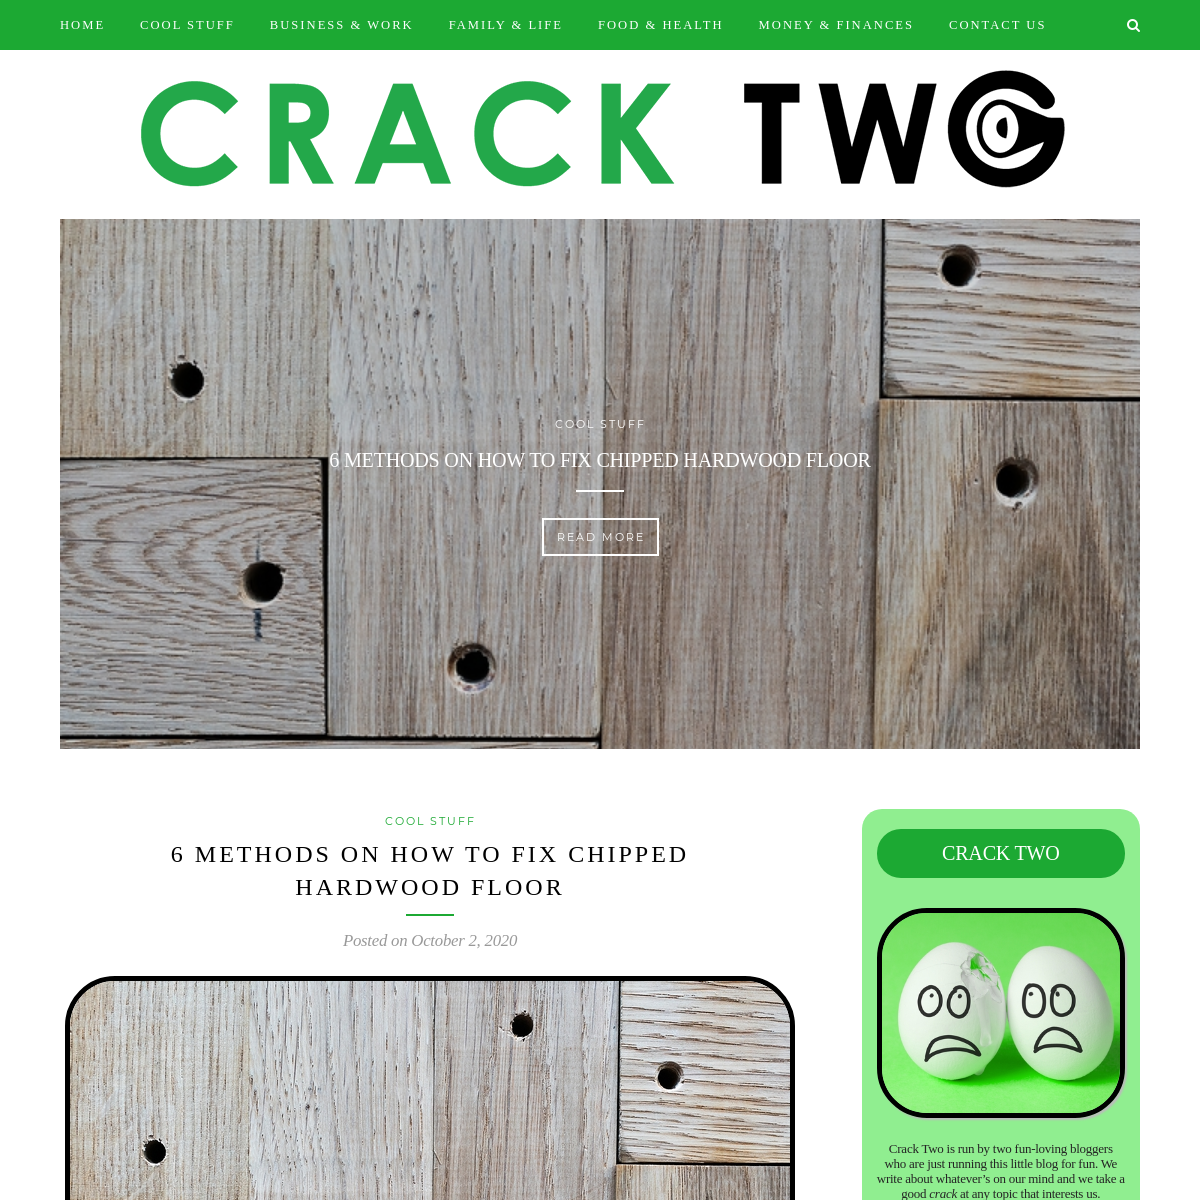 A complete backup of cracktwo.com